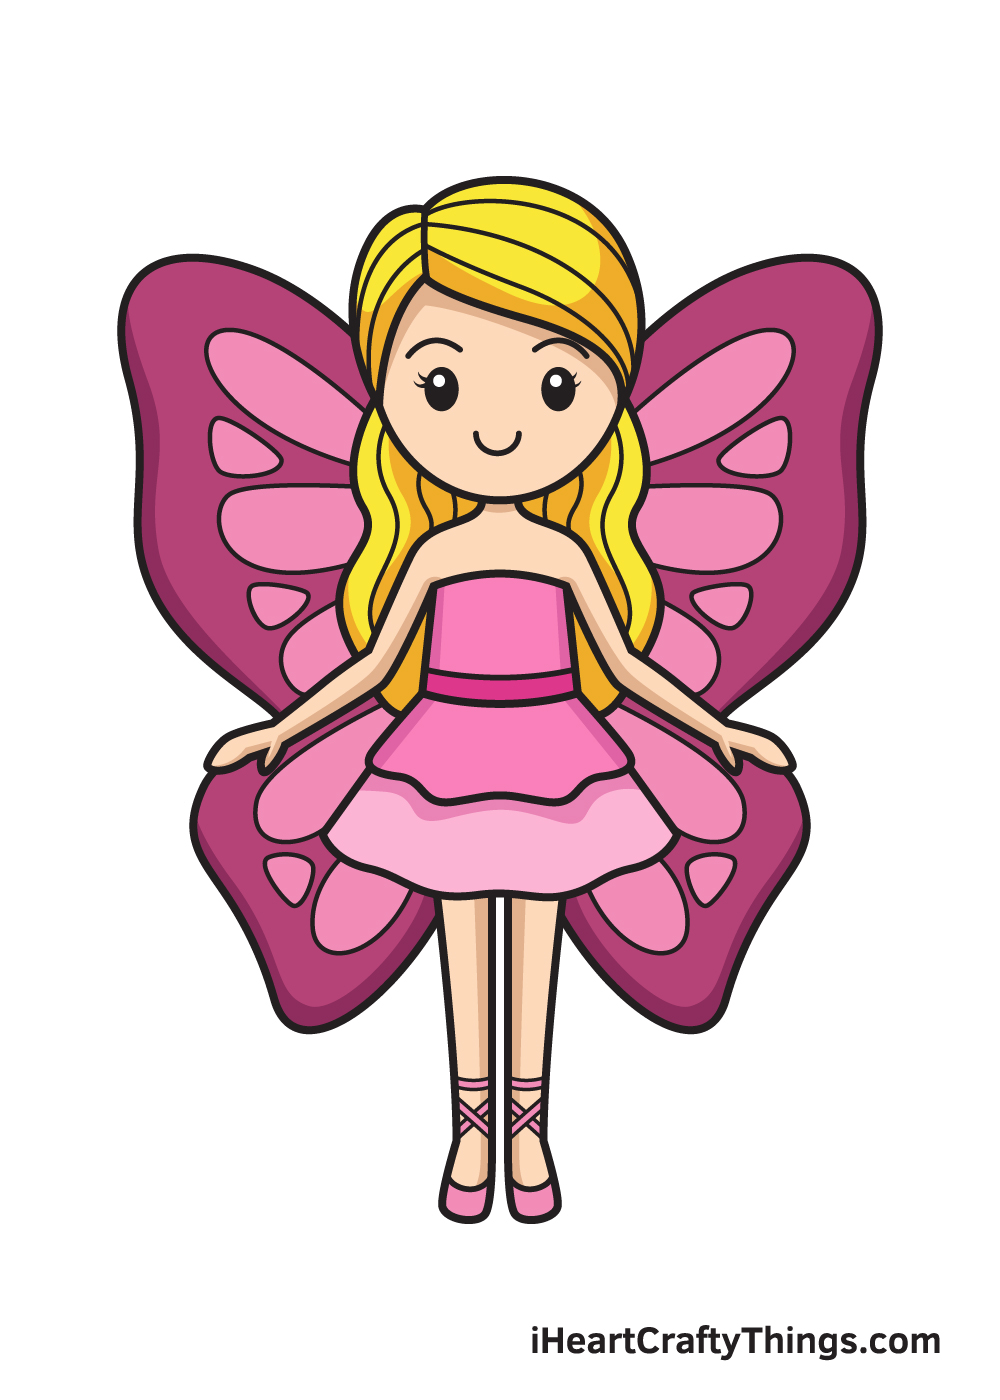 Fairy Drawing – 9 Steps